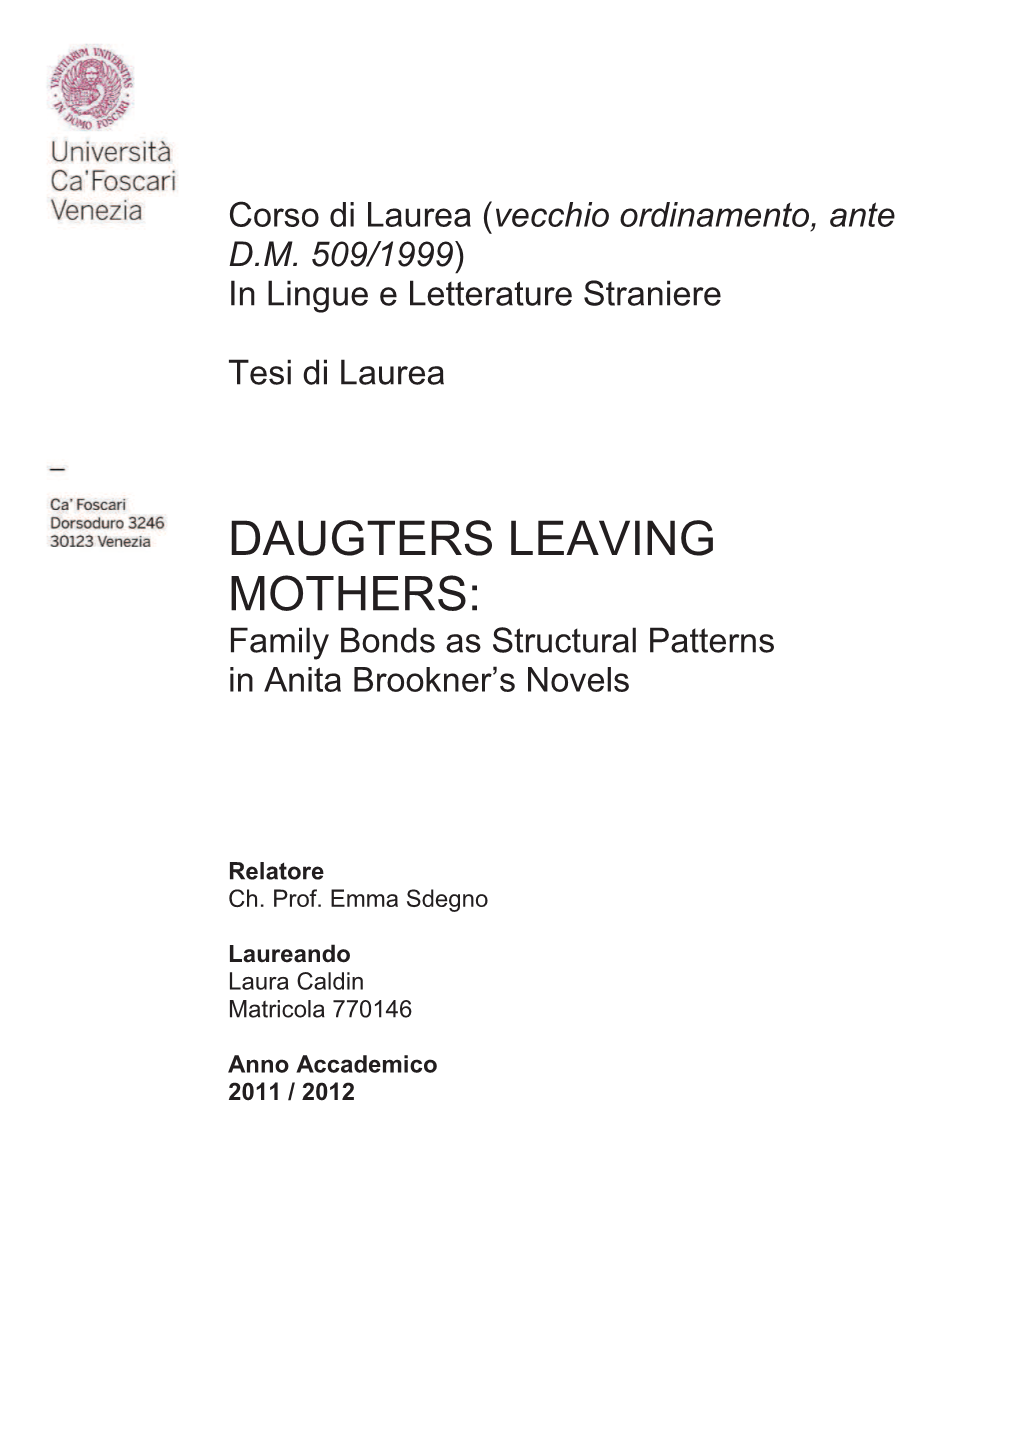 DAUGTERS LEAVING MOTHERS: Family Bonds As Structural Patterns in Anita Brookner’S Novels